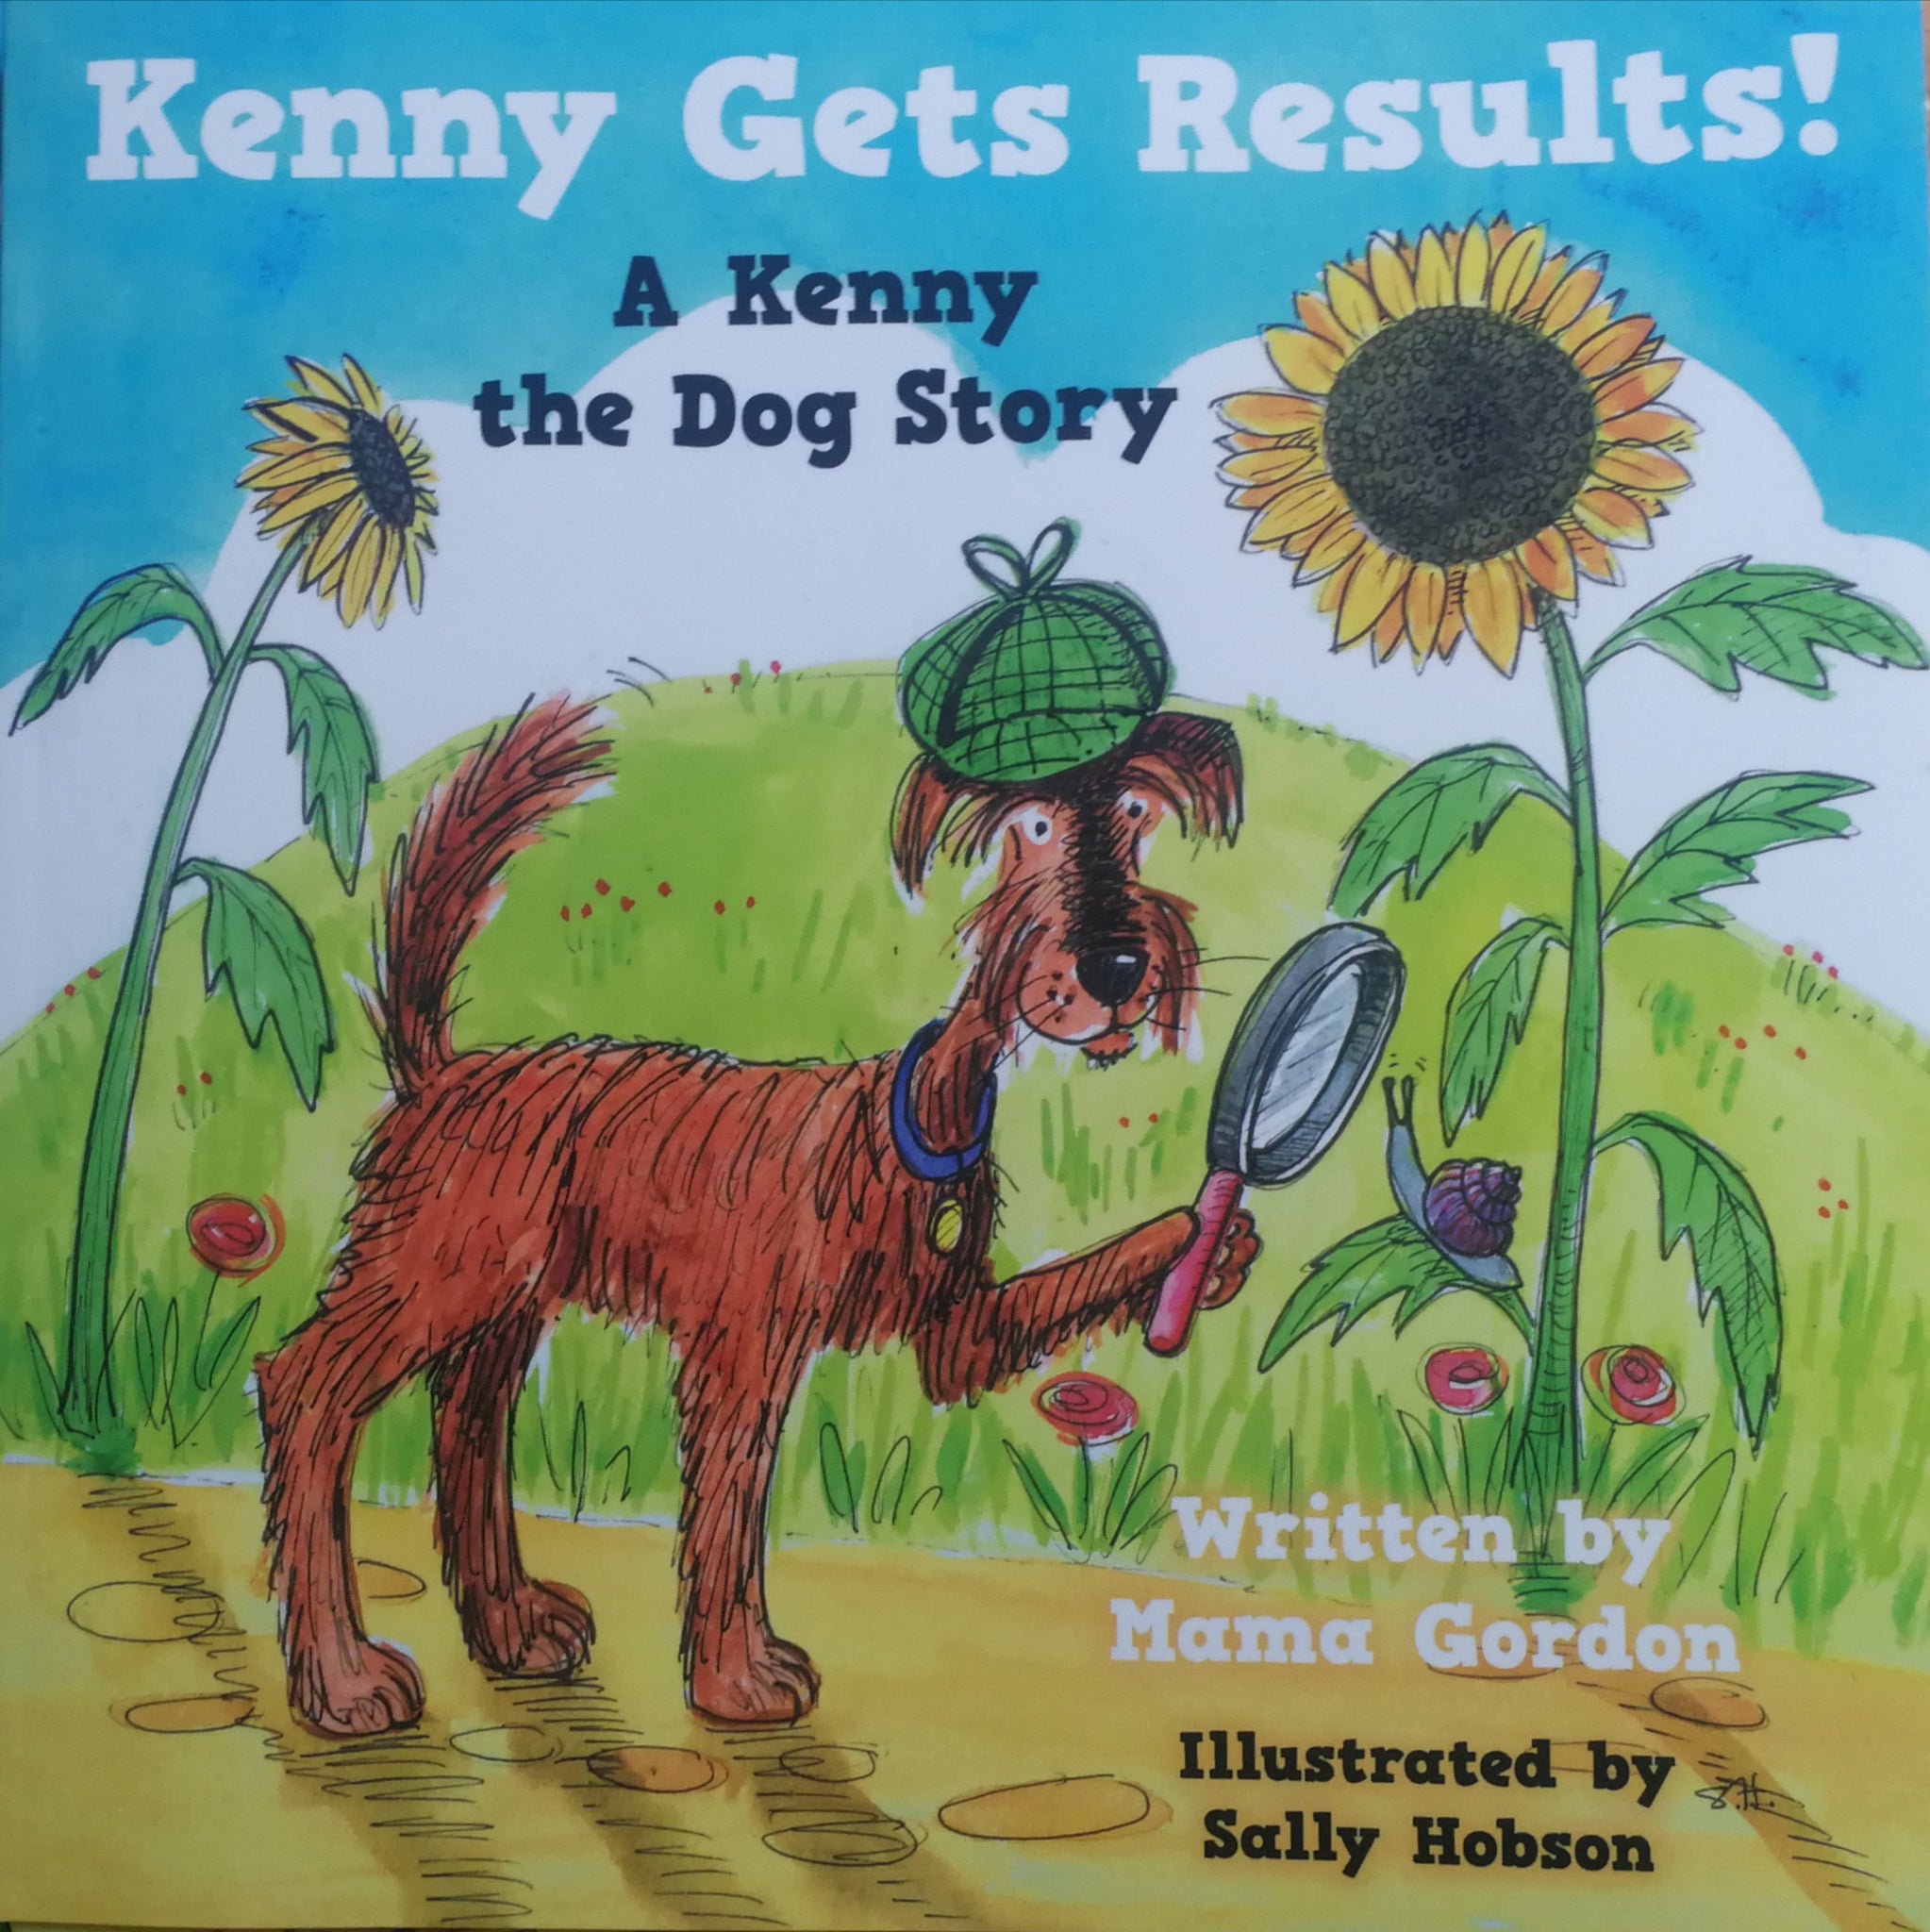 Kenny gets results